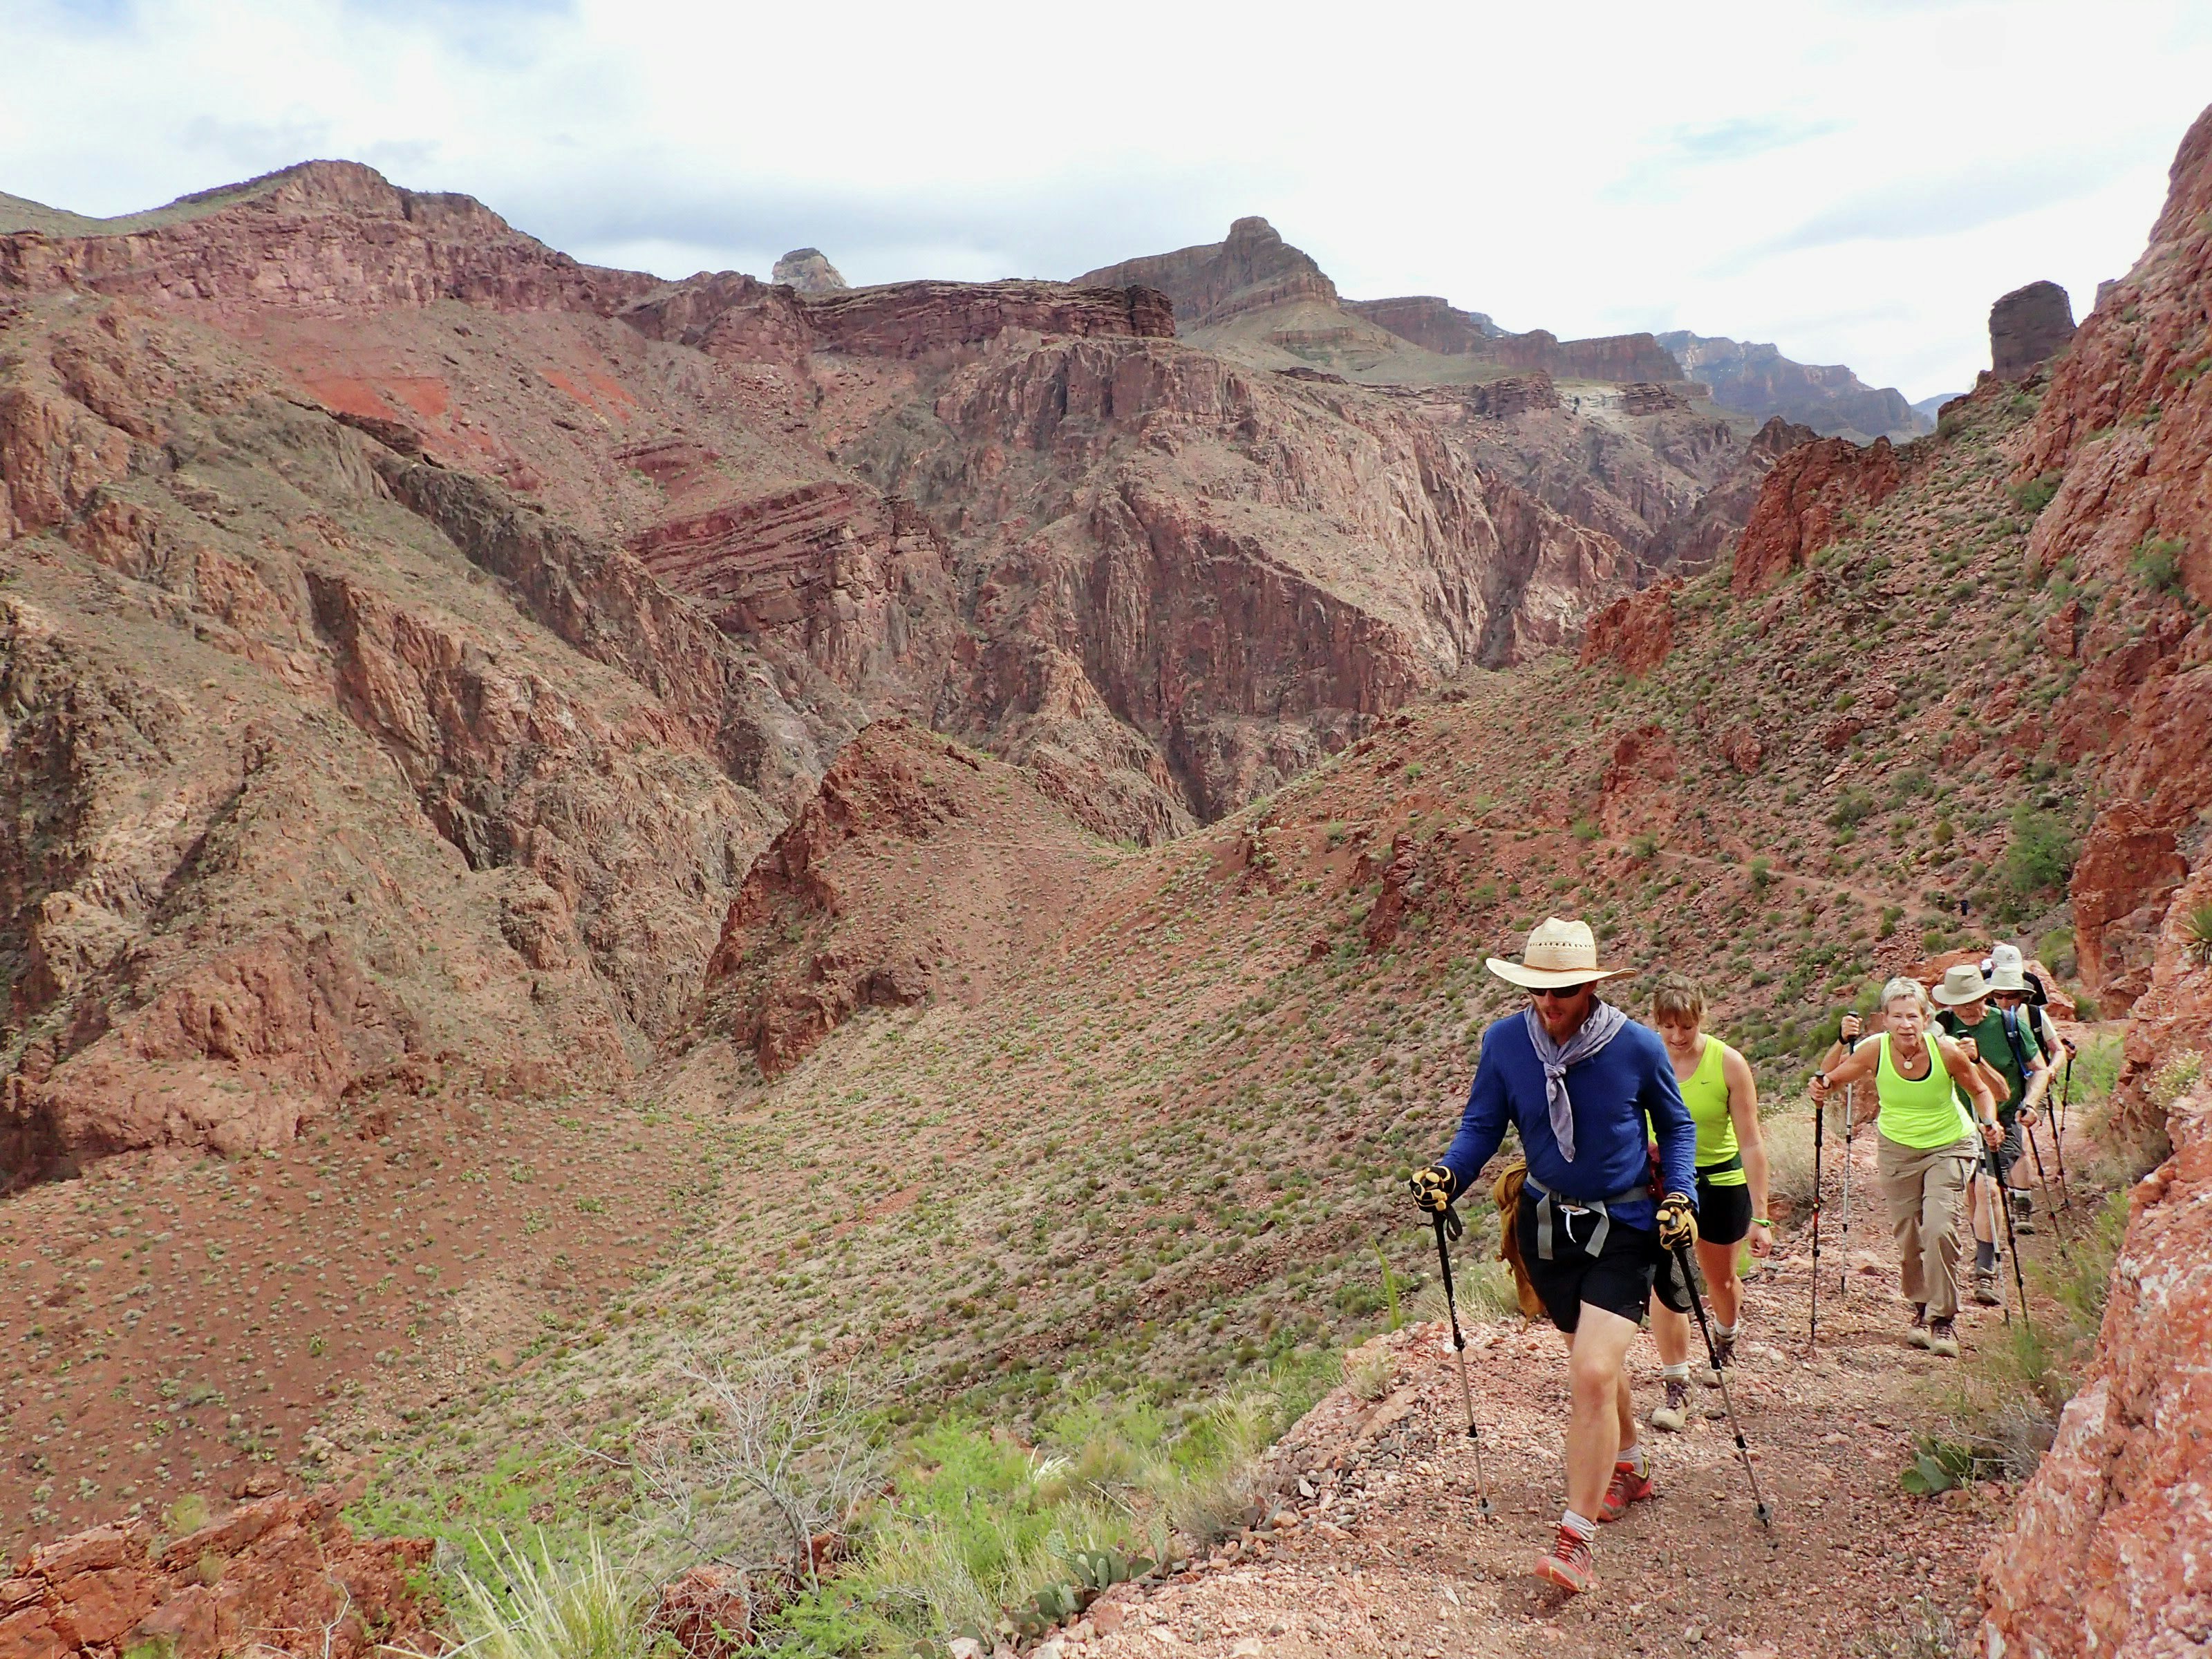 A group of people in hiking gear march up the slope of the Grand Canyon